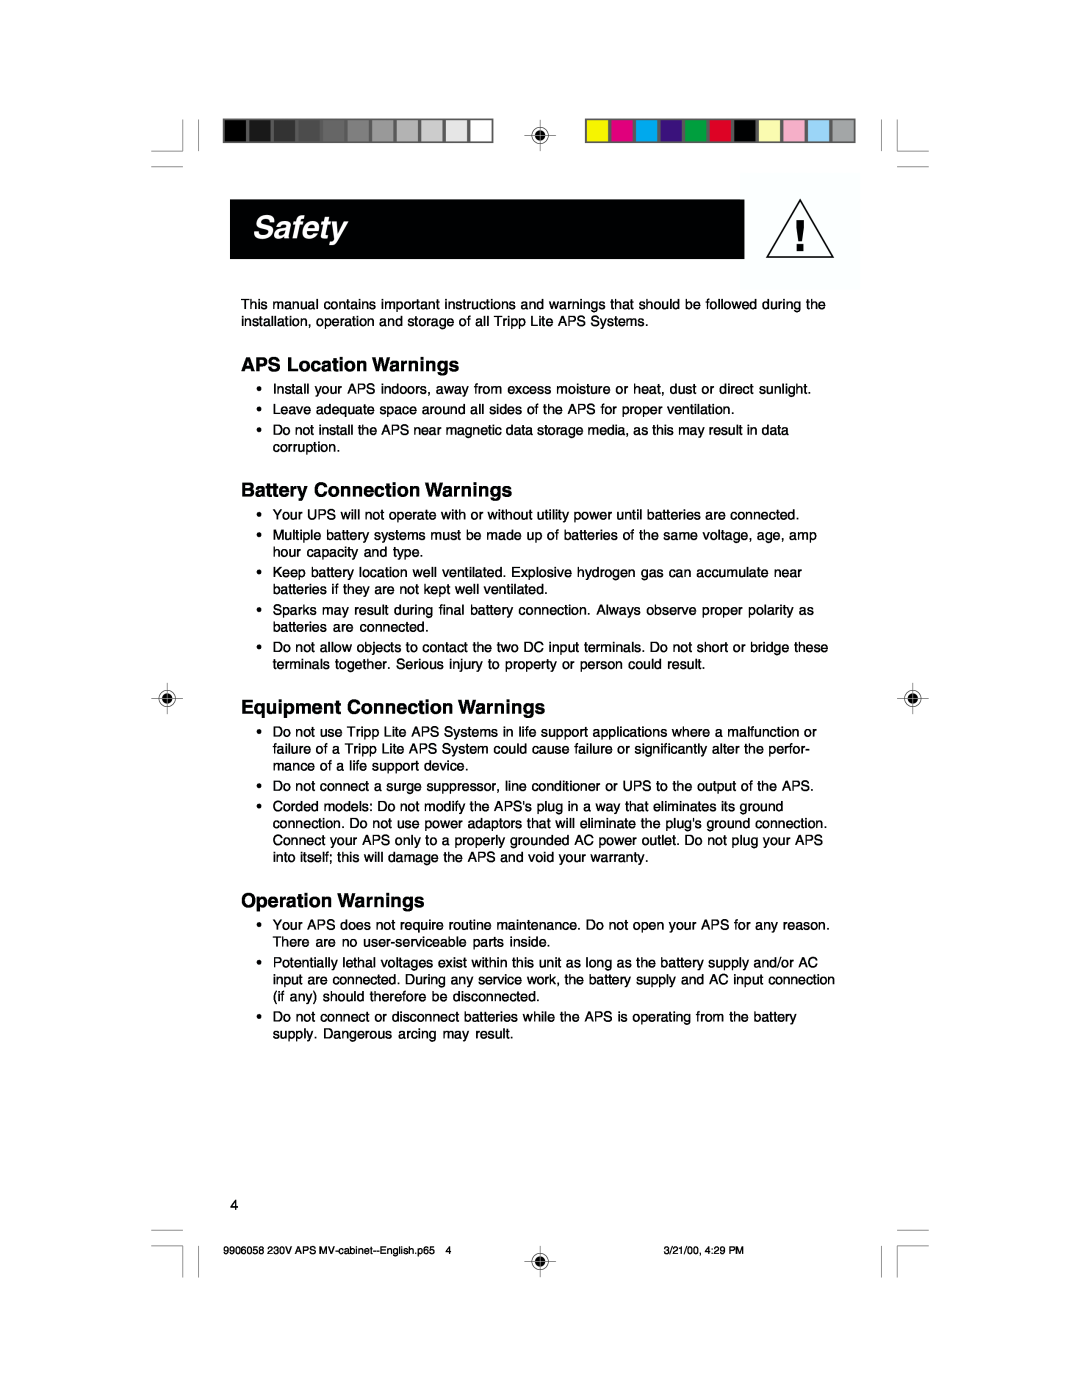 Tripp Lite APS2012INT Safety, APS Location Warnings, Battery Connection Warnings, Equipment Connection Warnings 